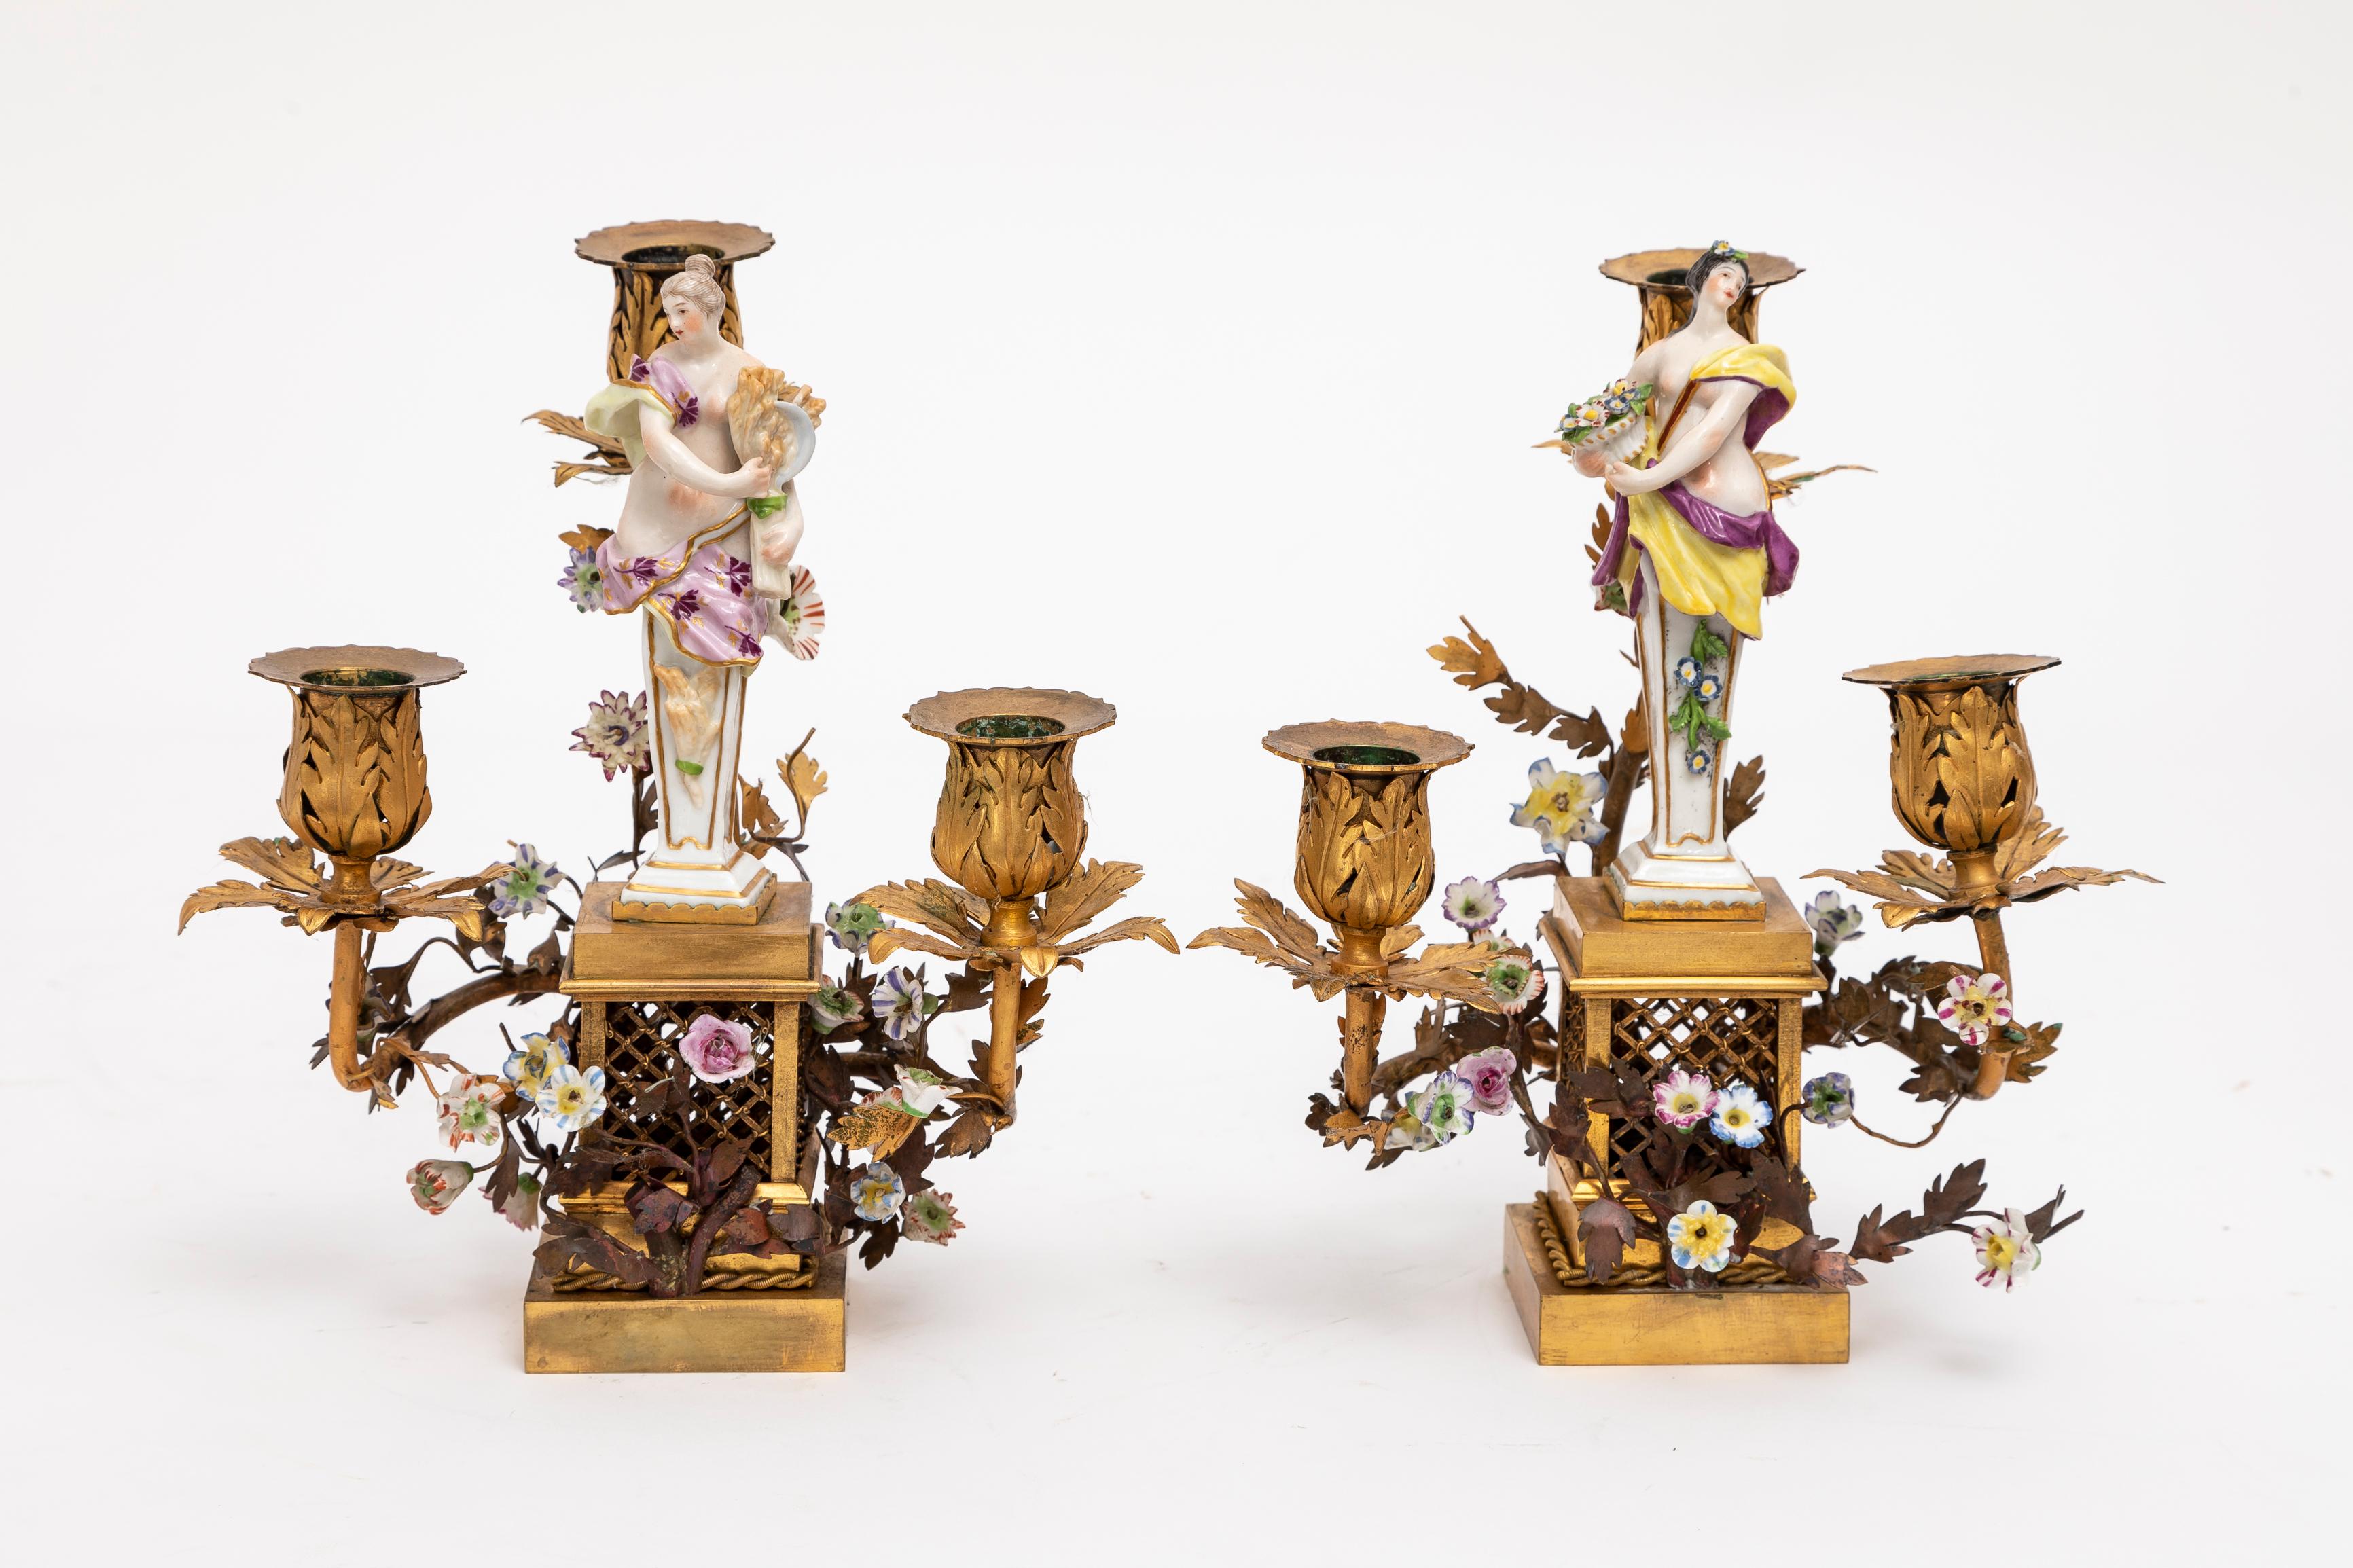 18th Century Meissen Porcelain and French Doré Bronze Candelabras with Applied Porcelain Flowers

Step into an era where Meissen porcelain meets French doré bronze in a harmonious blend of artistry and elegance. These 3-light candelabras, each a